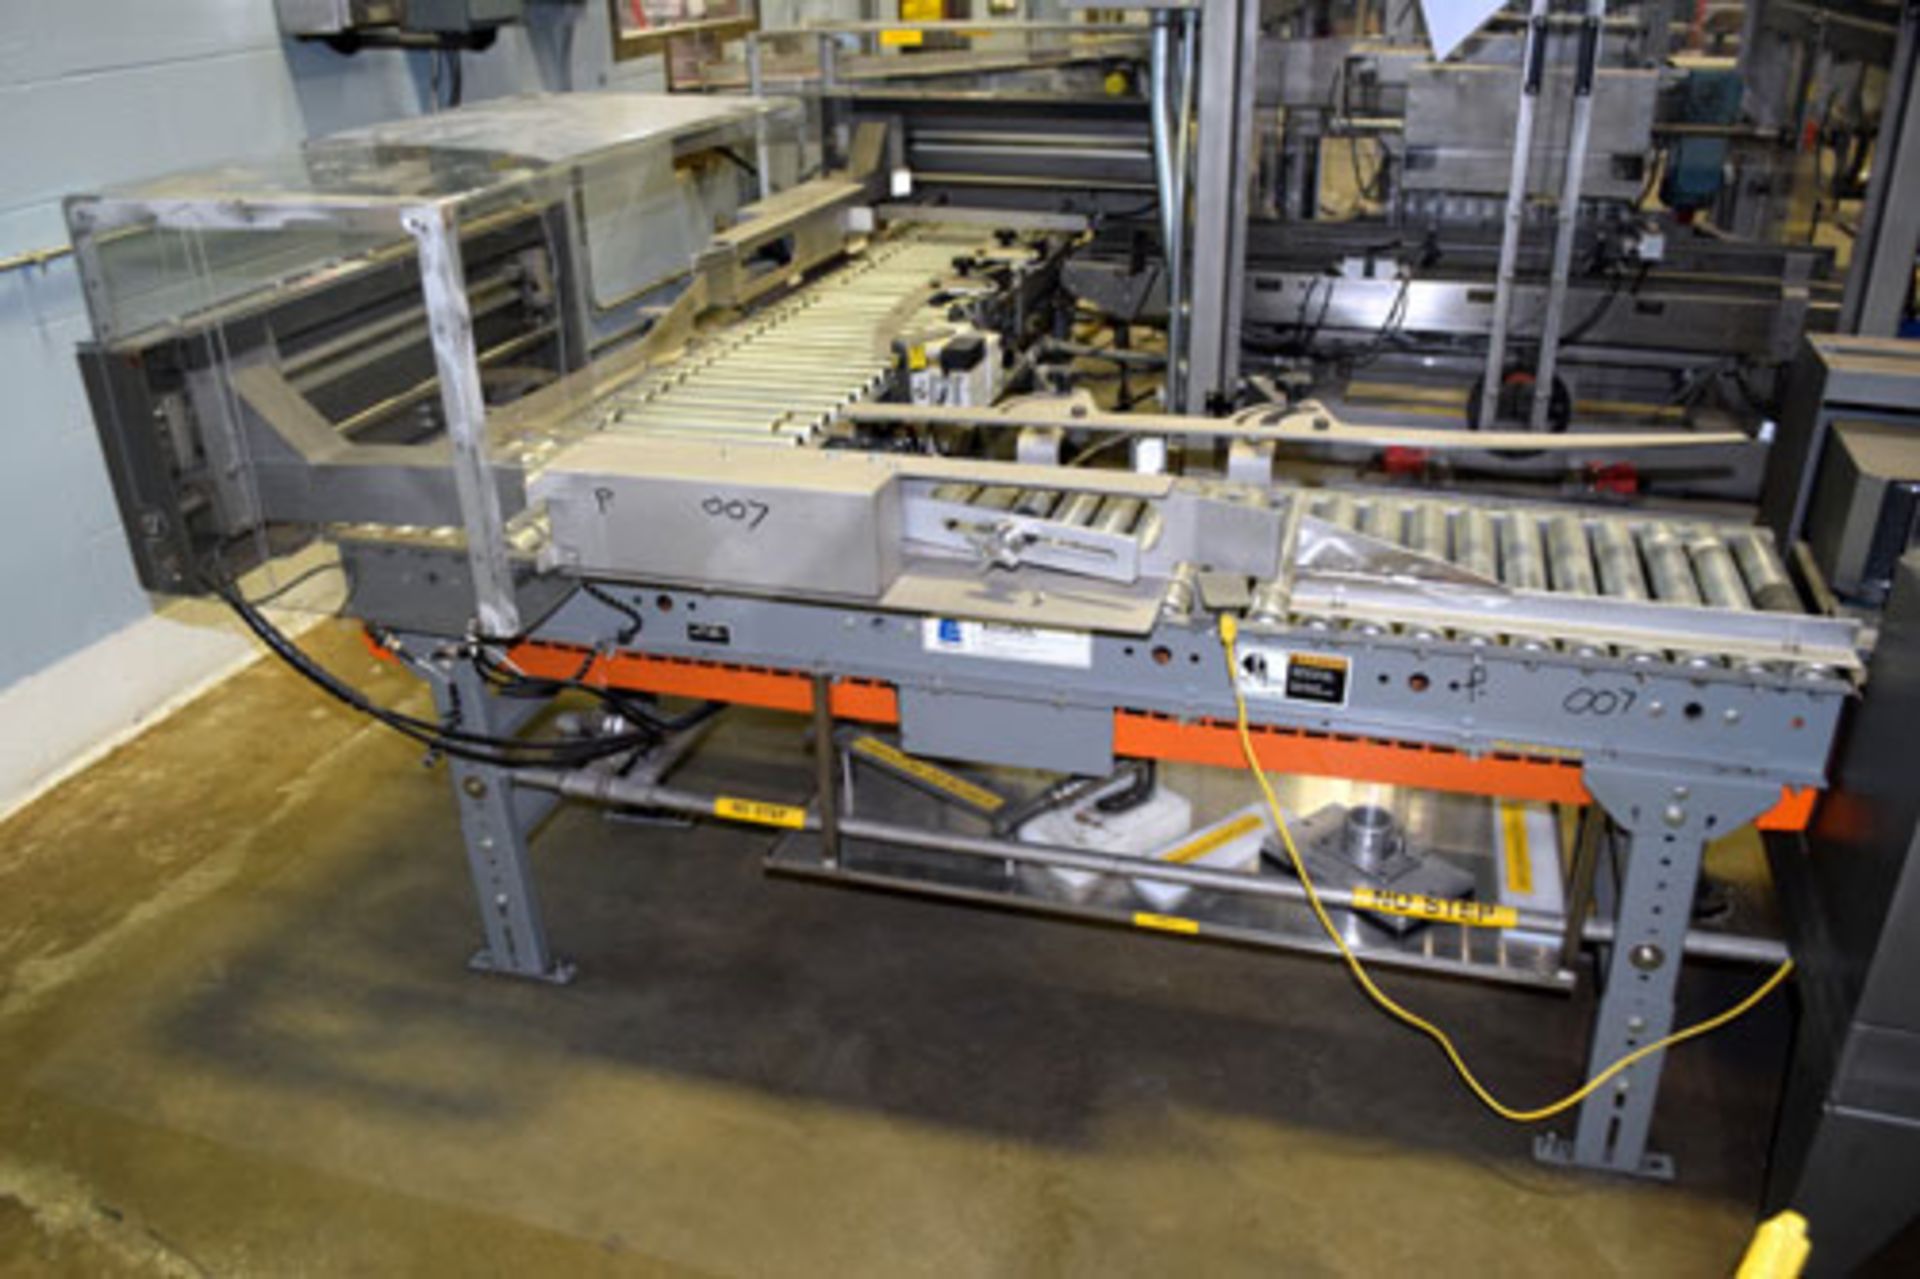 BluePrint Automation Robotic Top Loader, Serial# 597, Job# 13129, Built 2002. Includes infeed pro - Image 40 of 43